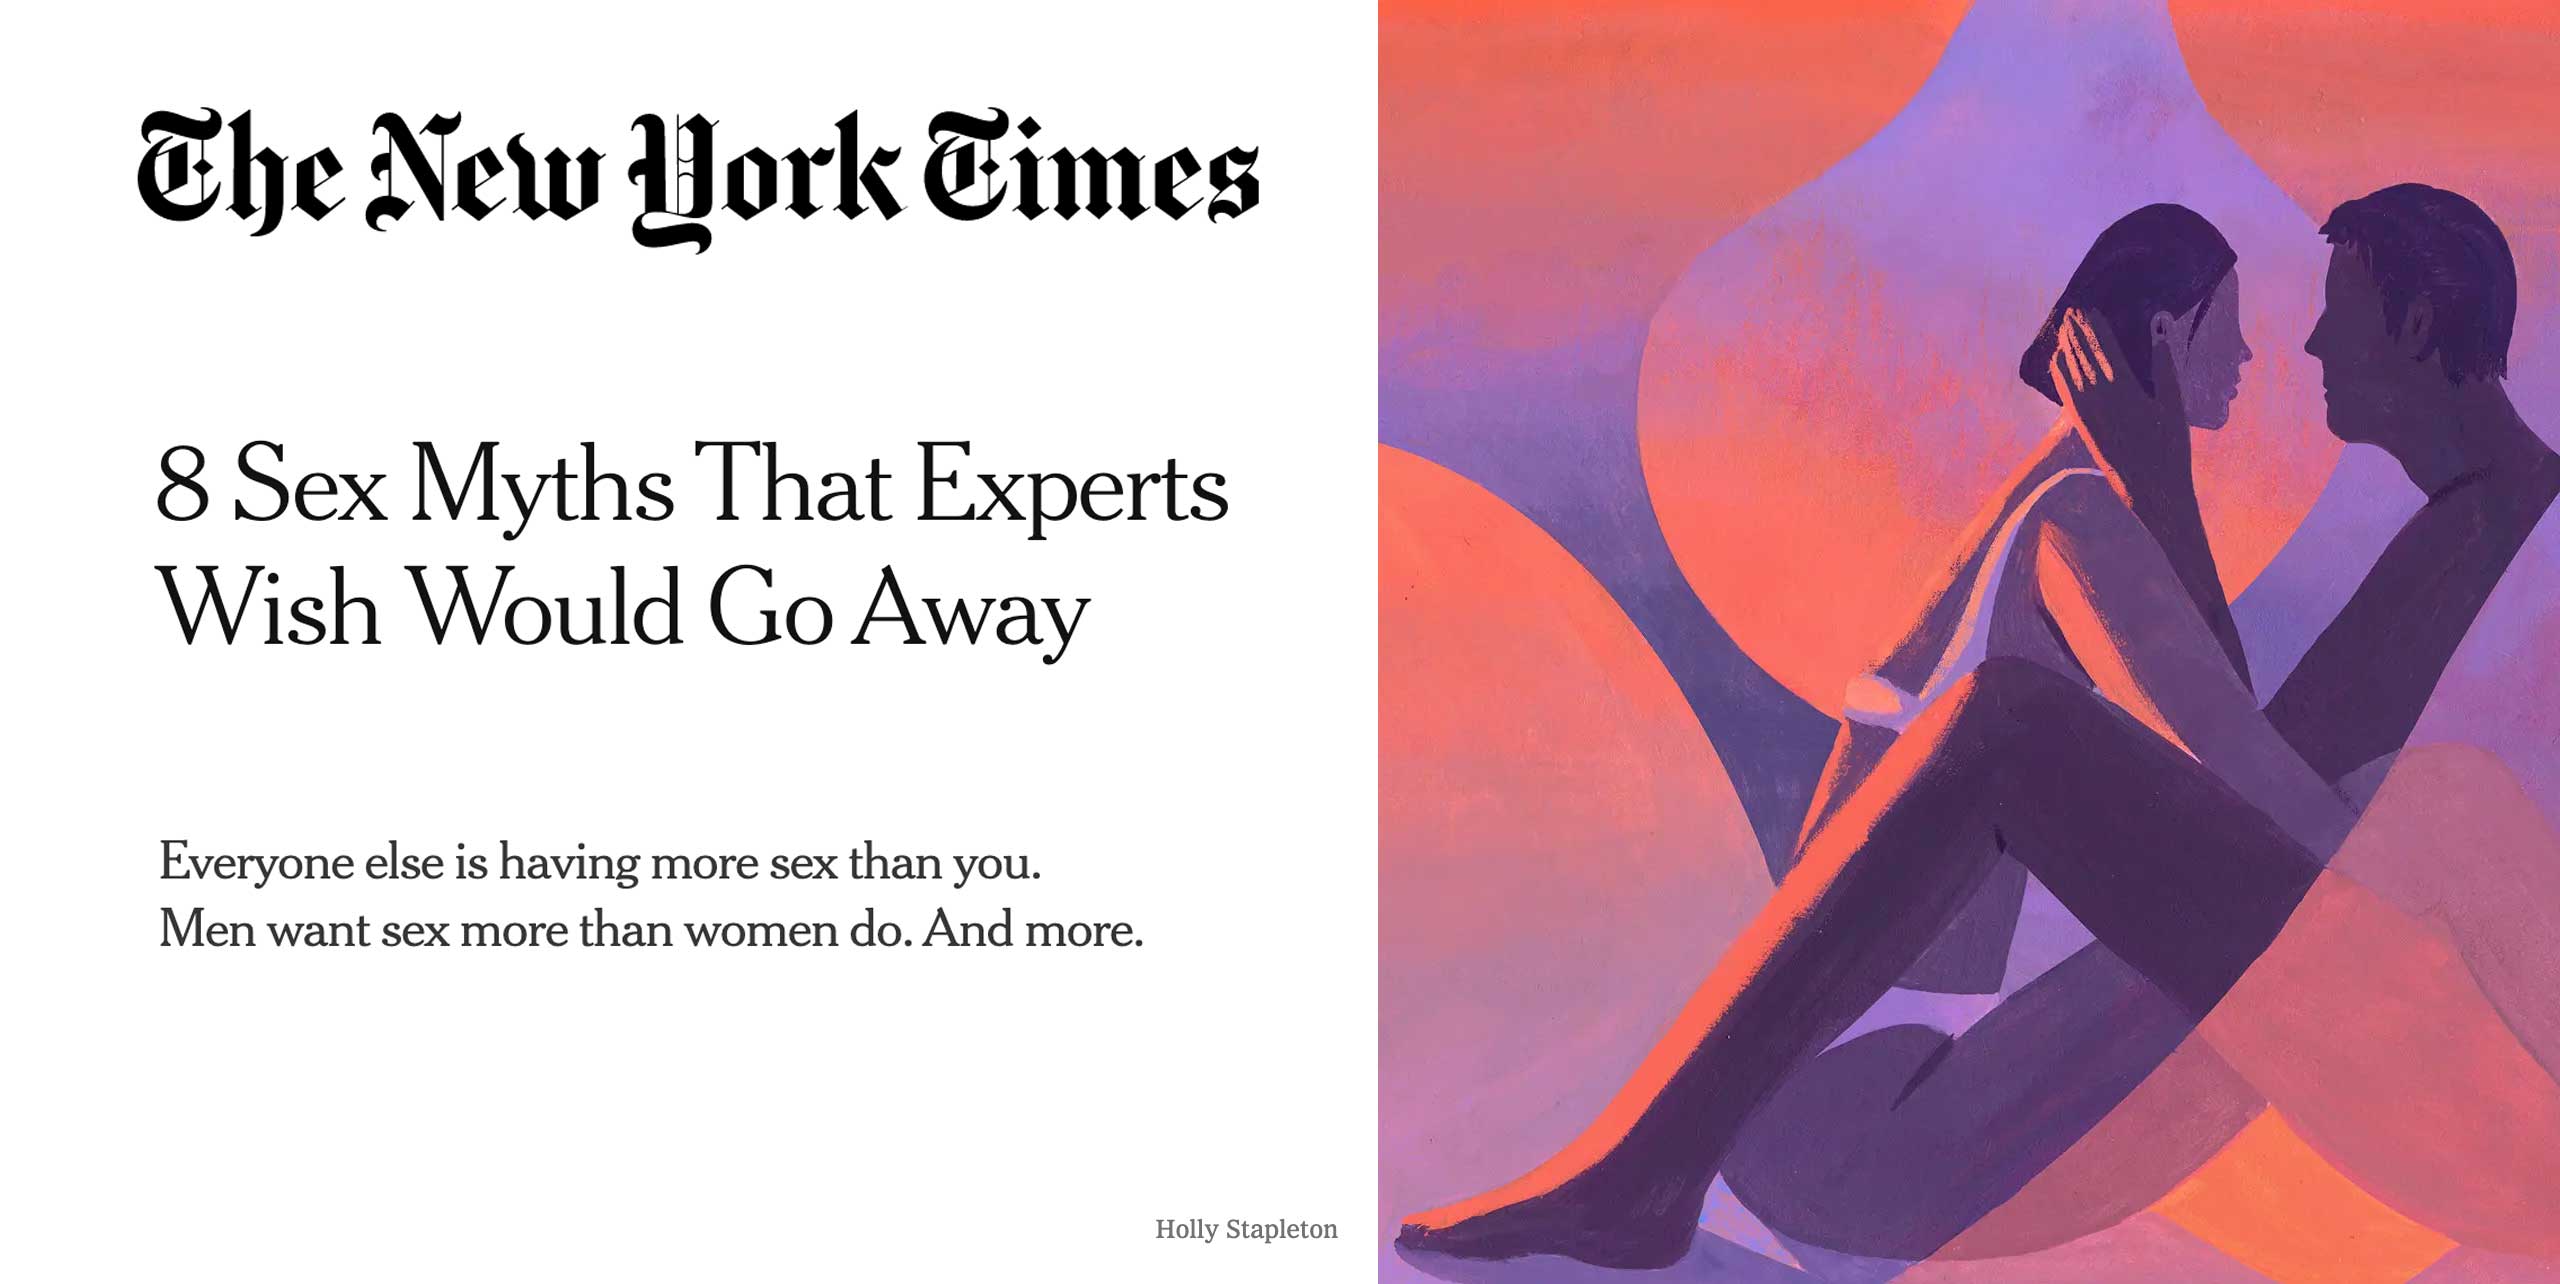 New York Times logo and illustration of couple embracing. Headline: 8 SEx Myths That Experts Wish Would Go Away Subheading: Everyone ielse is having more sex than you. Men want sex more than women do. And more.